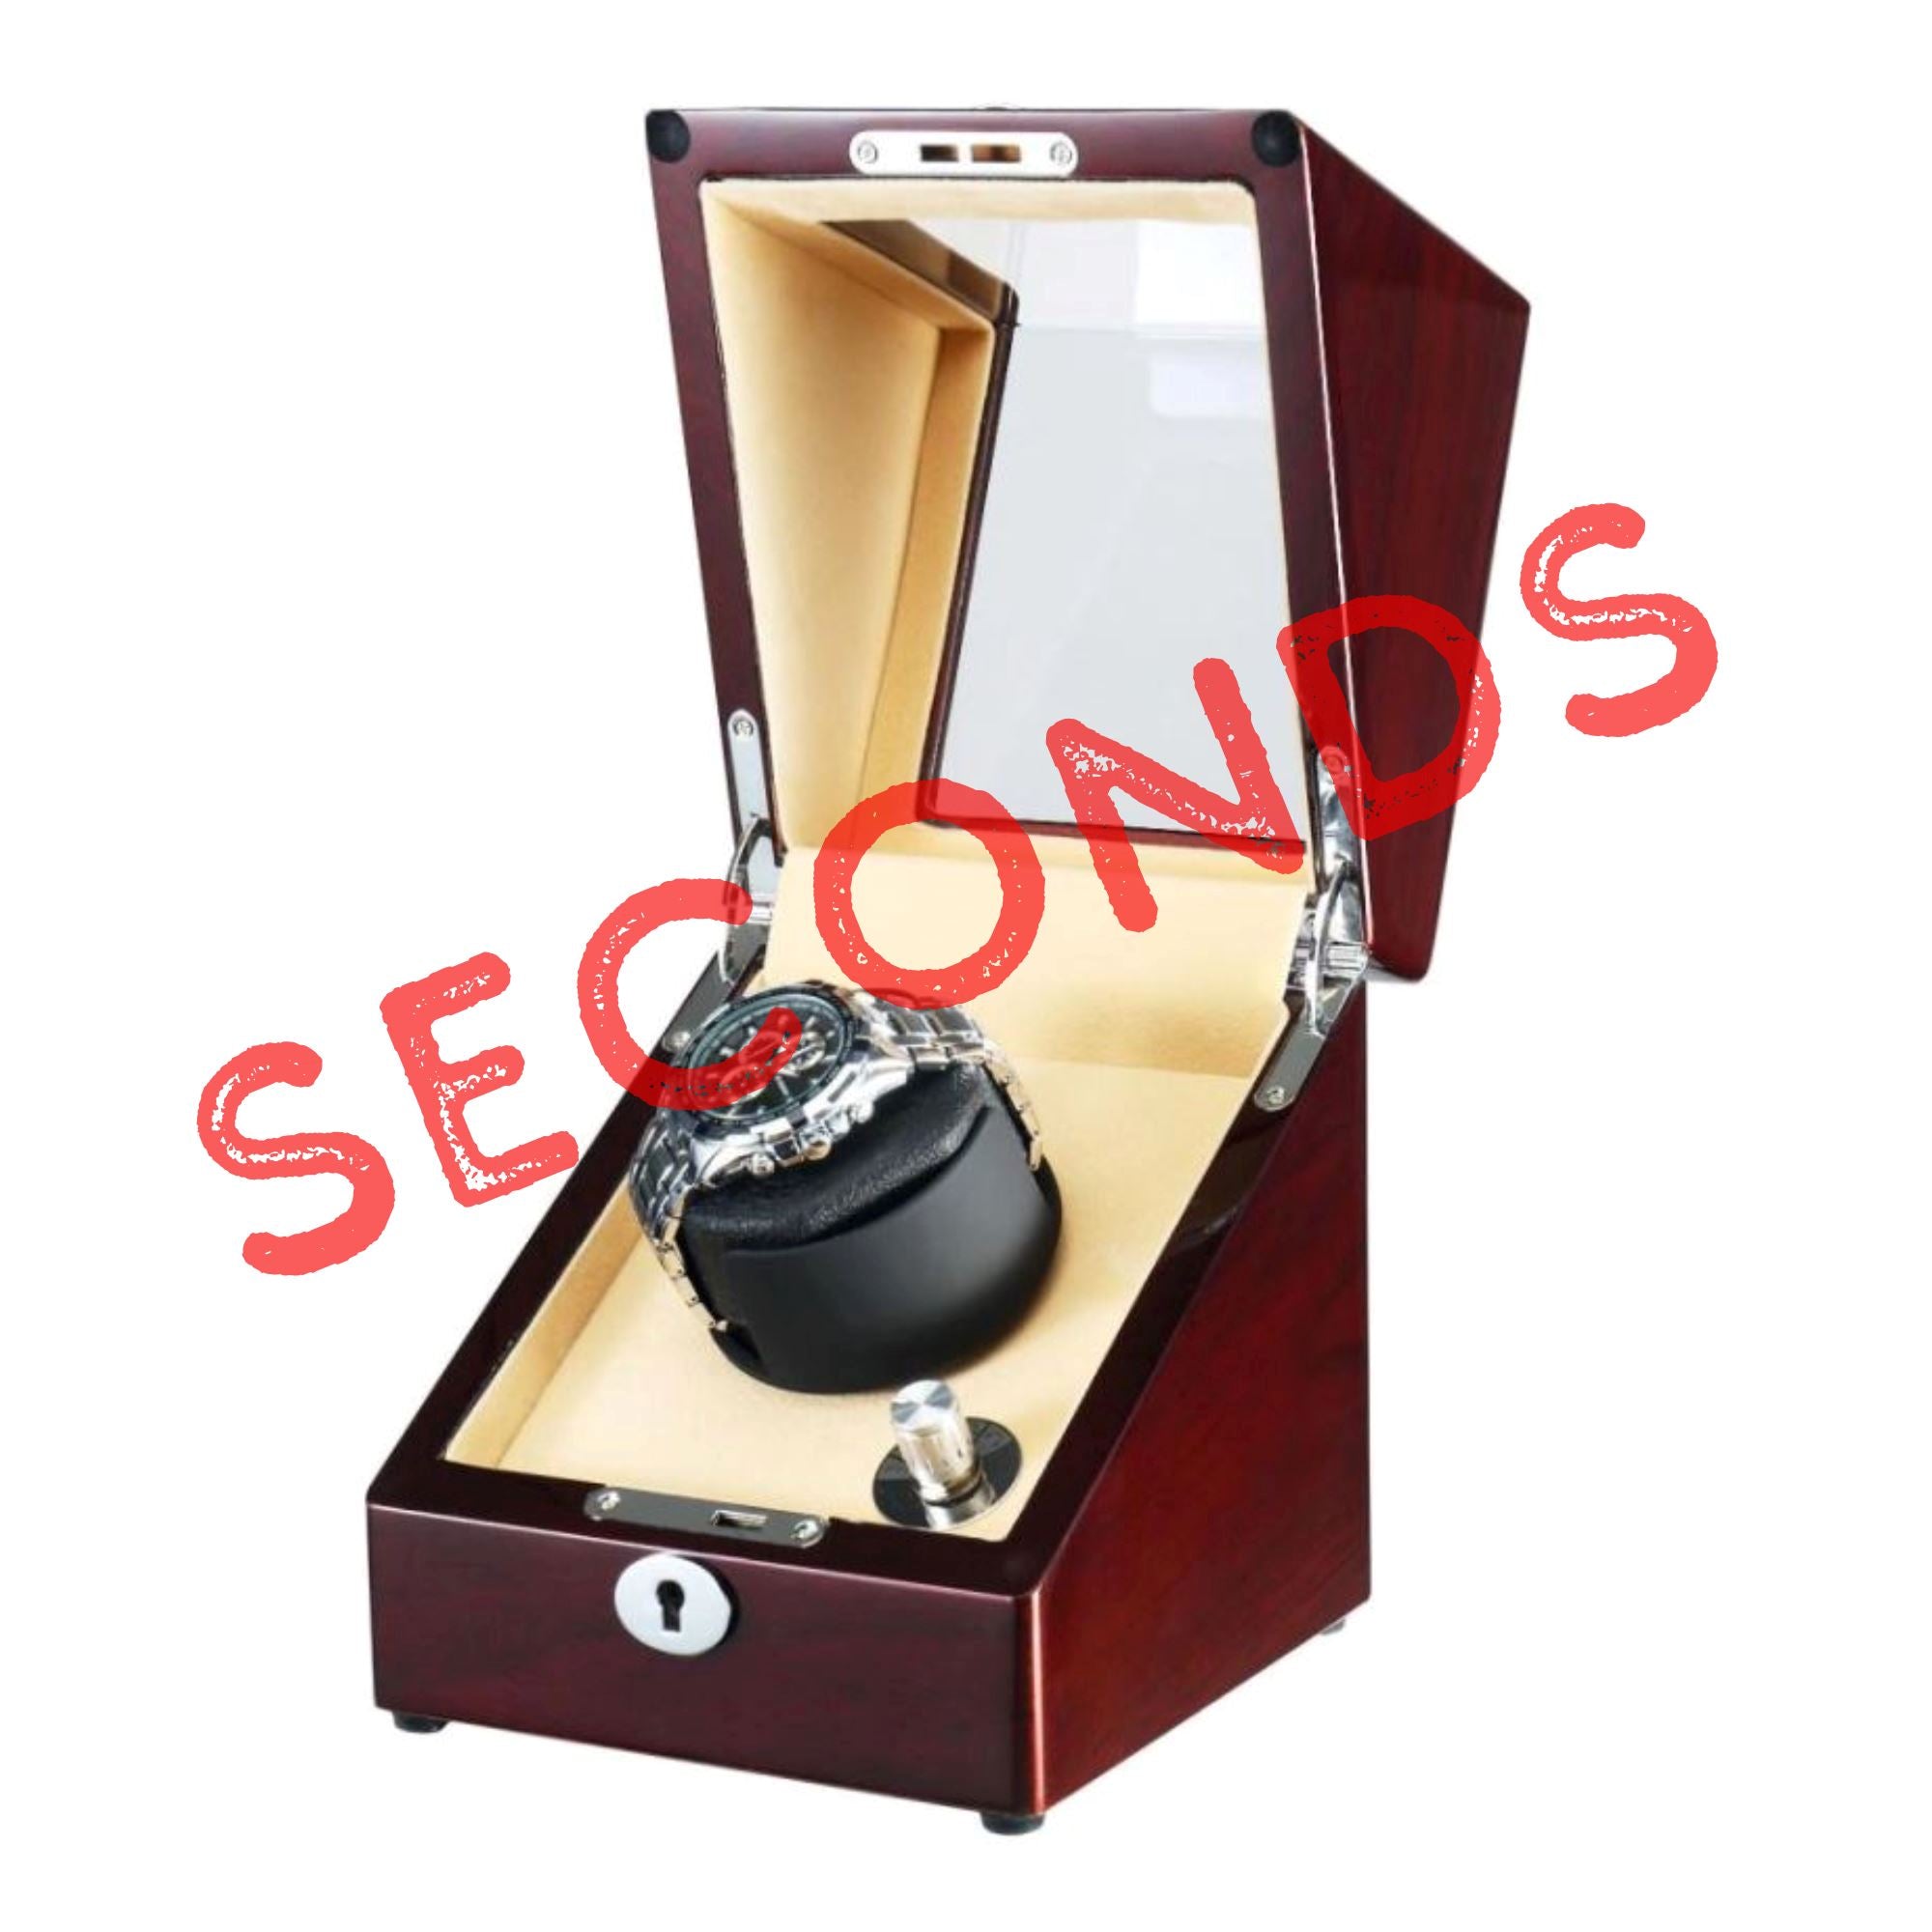 Seconds - Waratah Watch Winder Box for 1 Watch in Mahogany (M) Seconds Clinks 